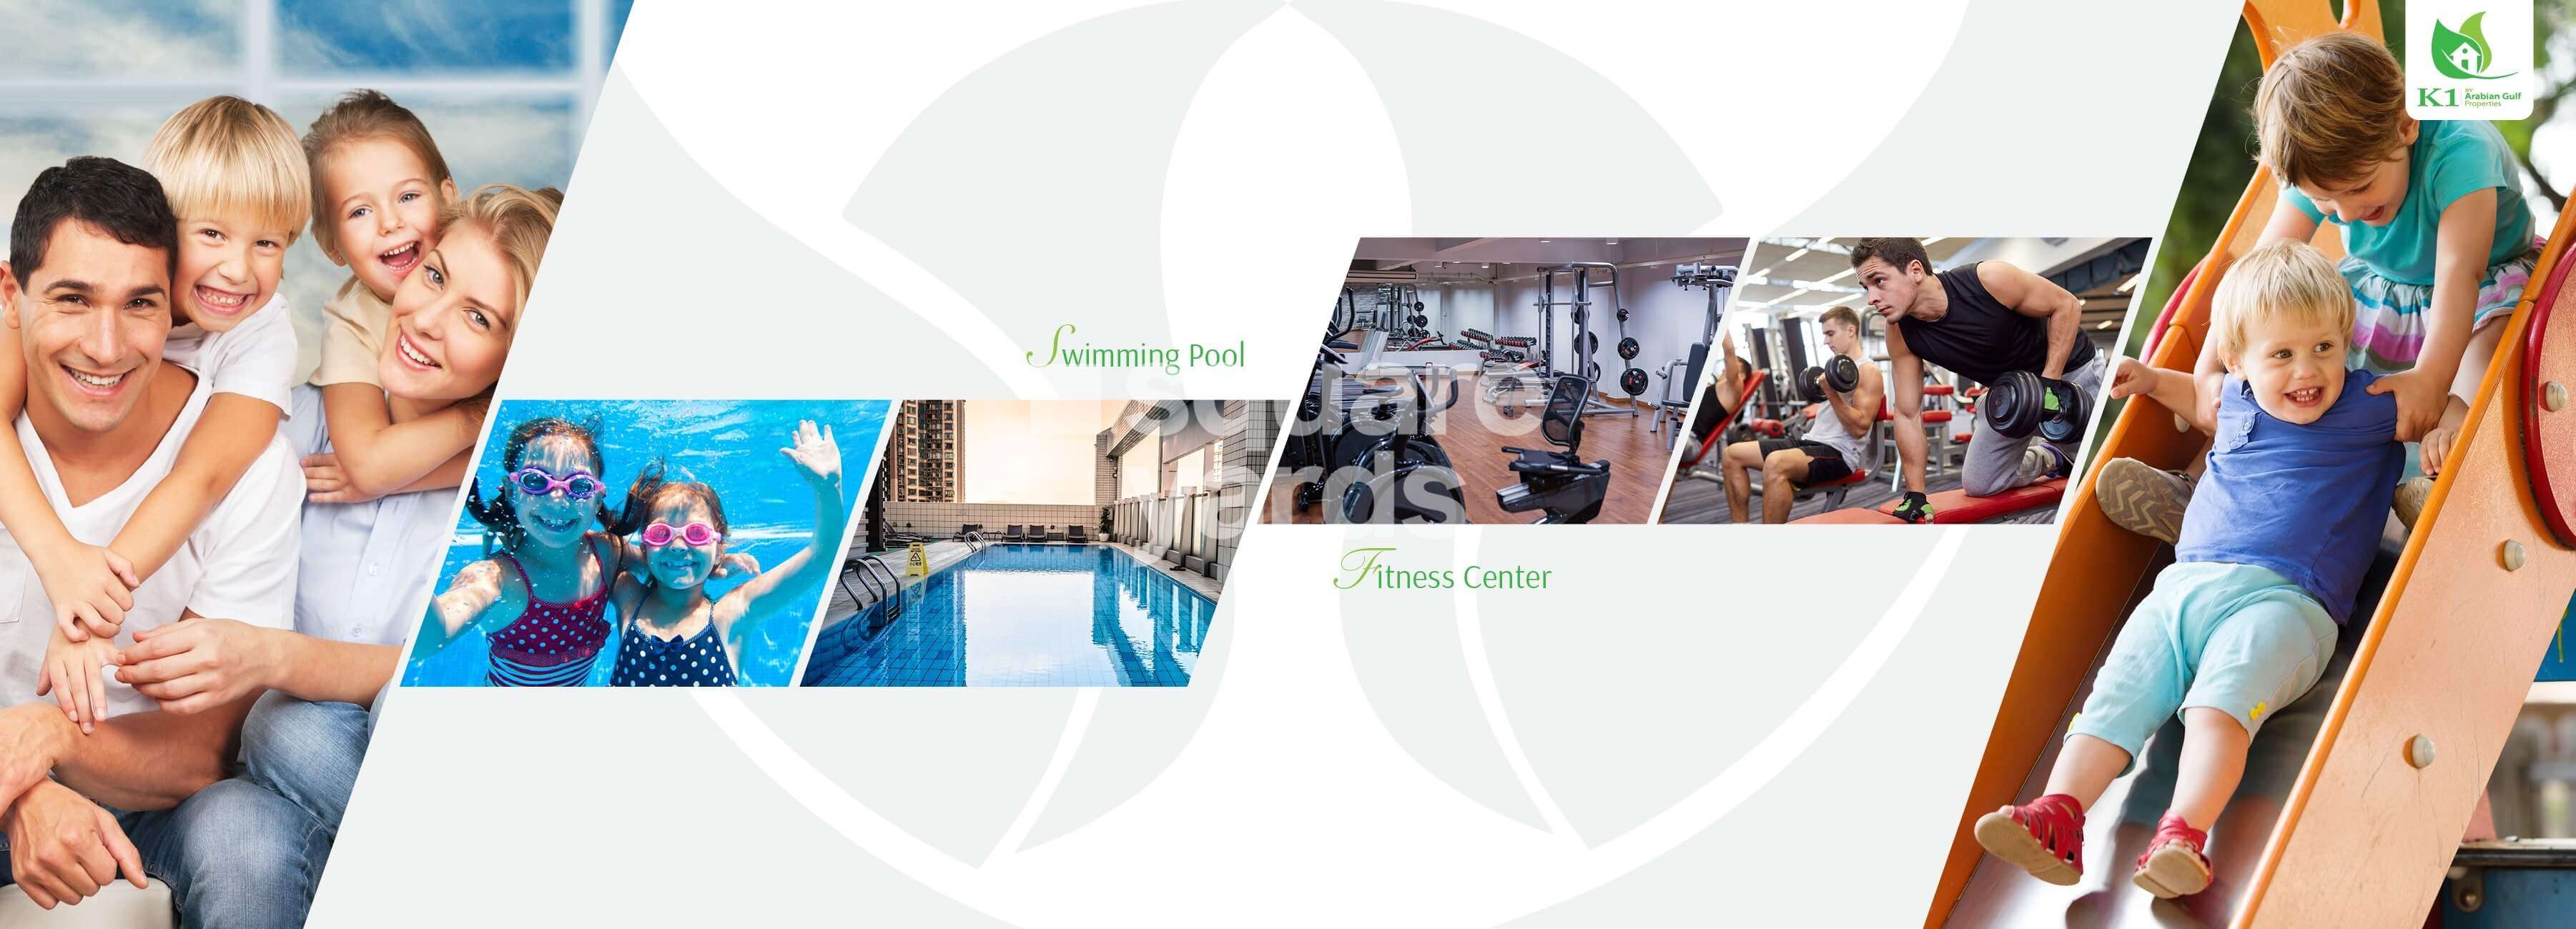 k1 residence amenities features4